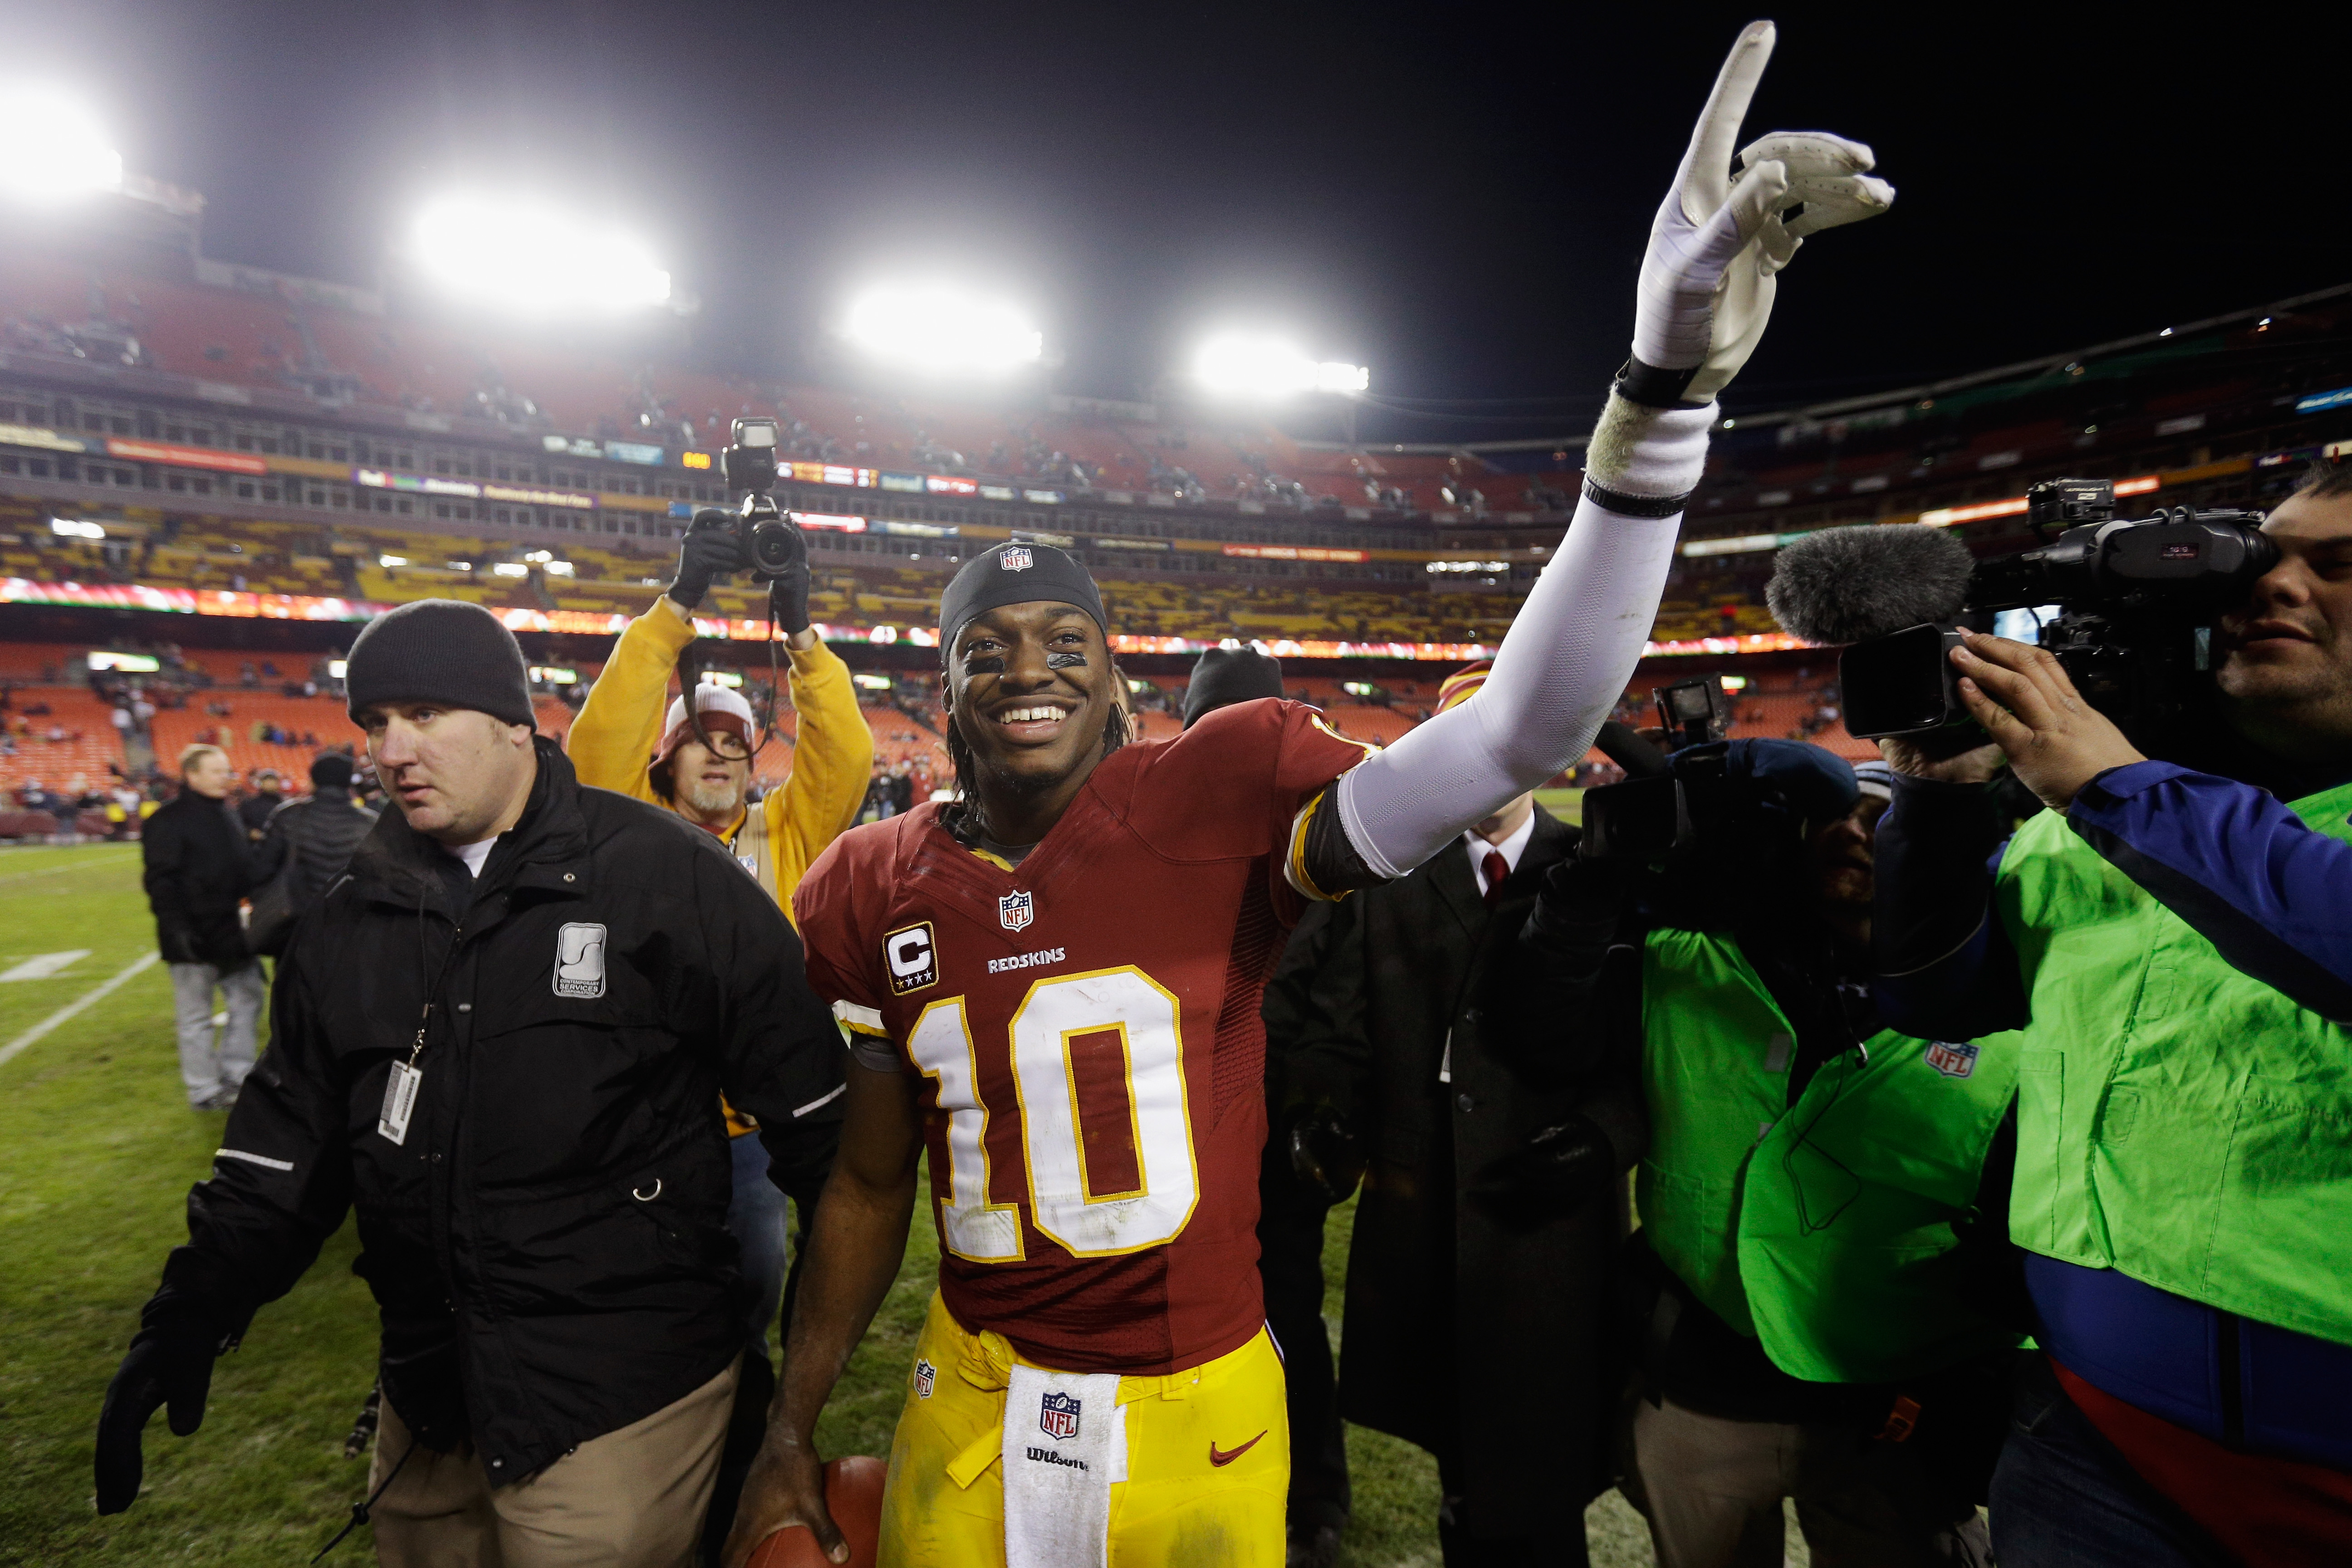 Quarterback Robert Griffin III celebrates after the Redskins defeated the Dallas Cowboys to win the NFC East in 2012. (Photo by Rob Carr/Getty Images)